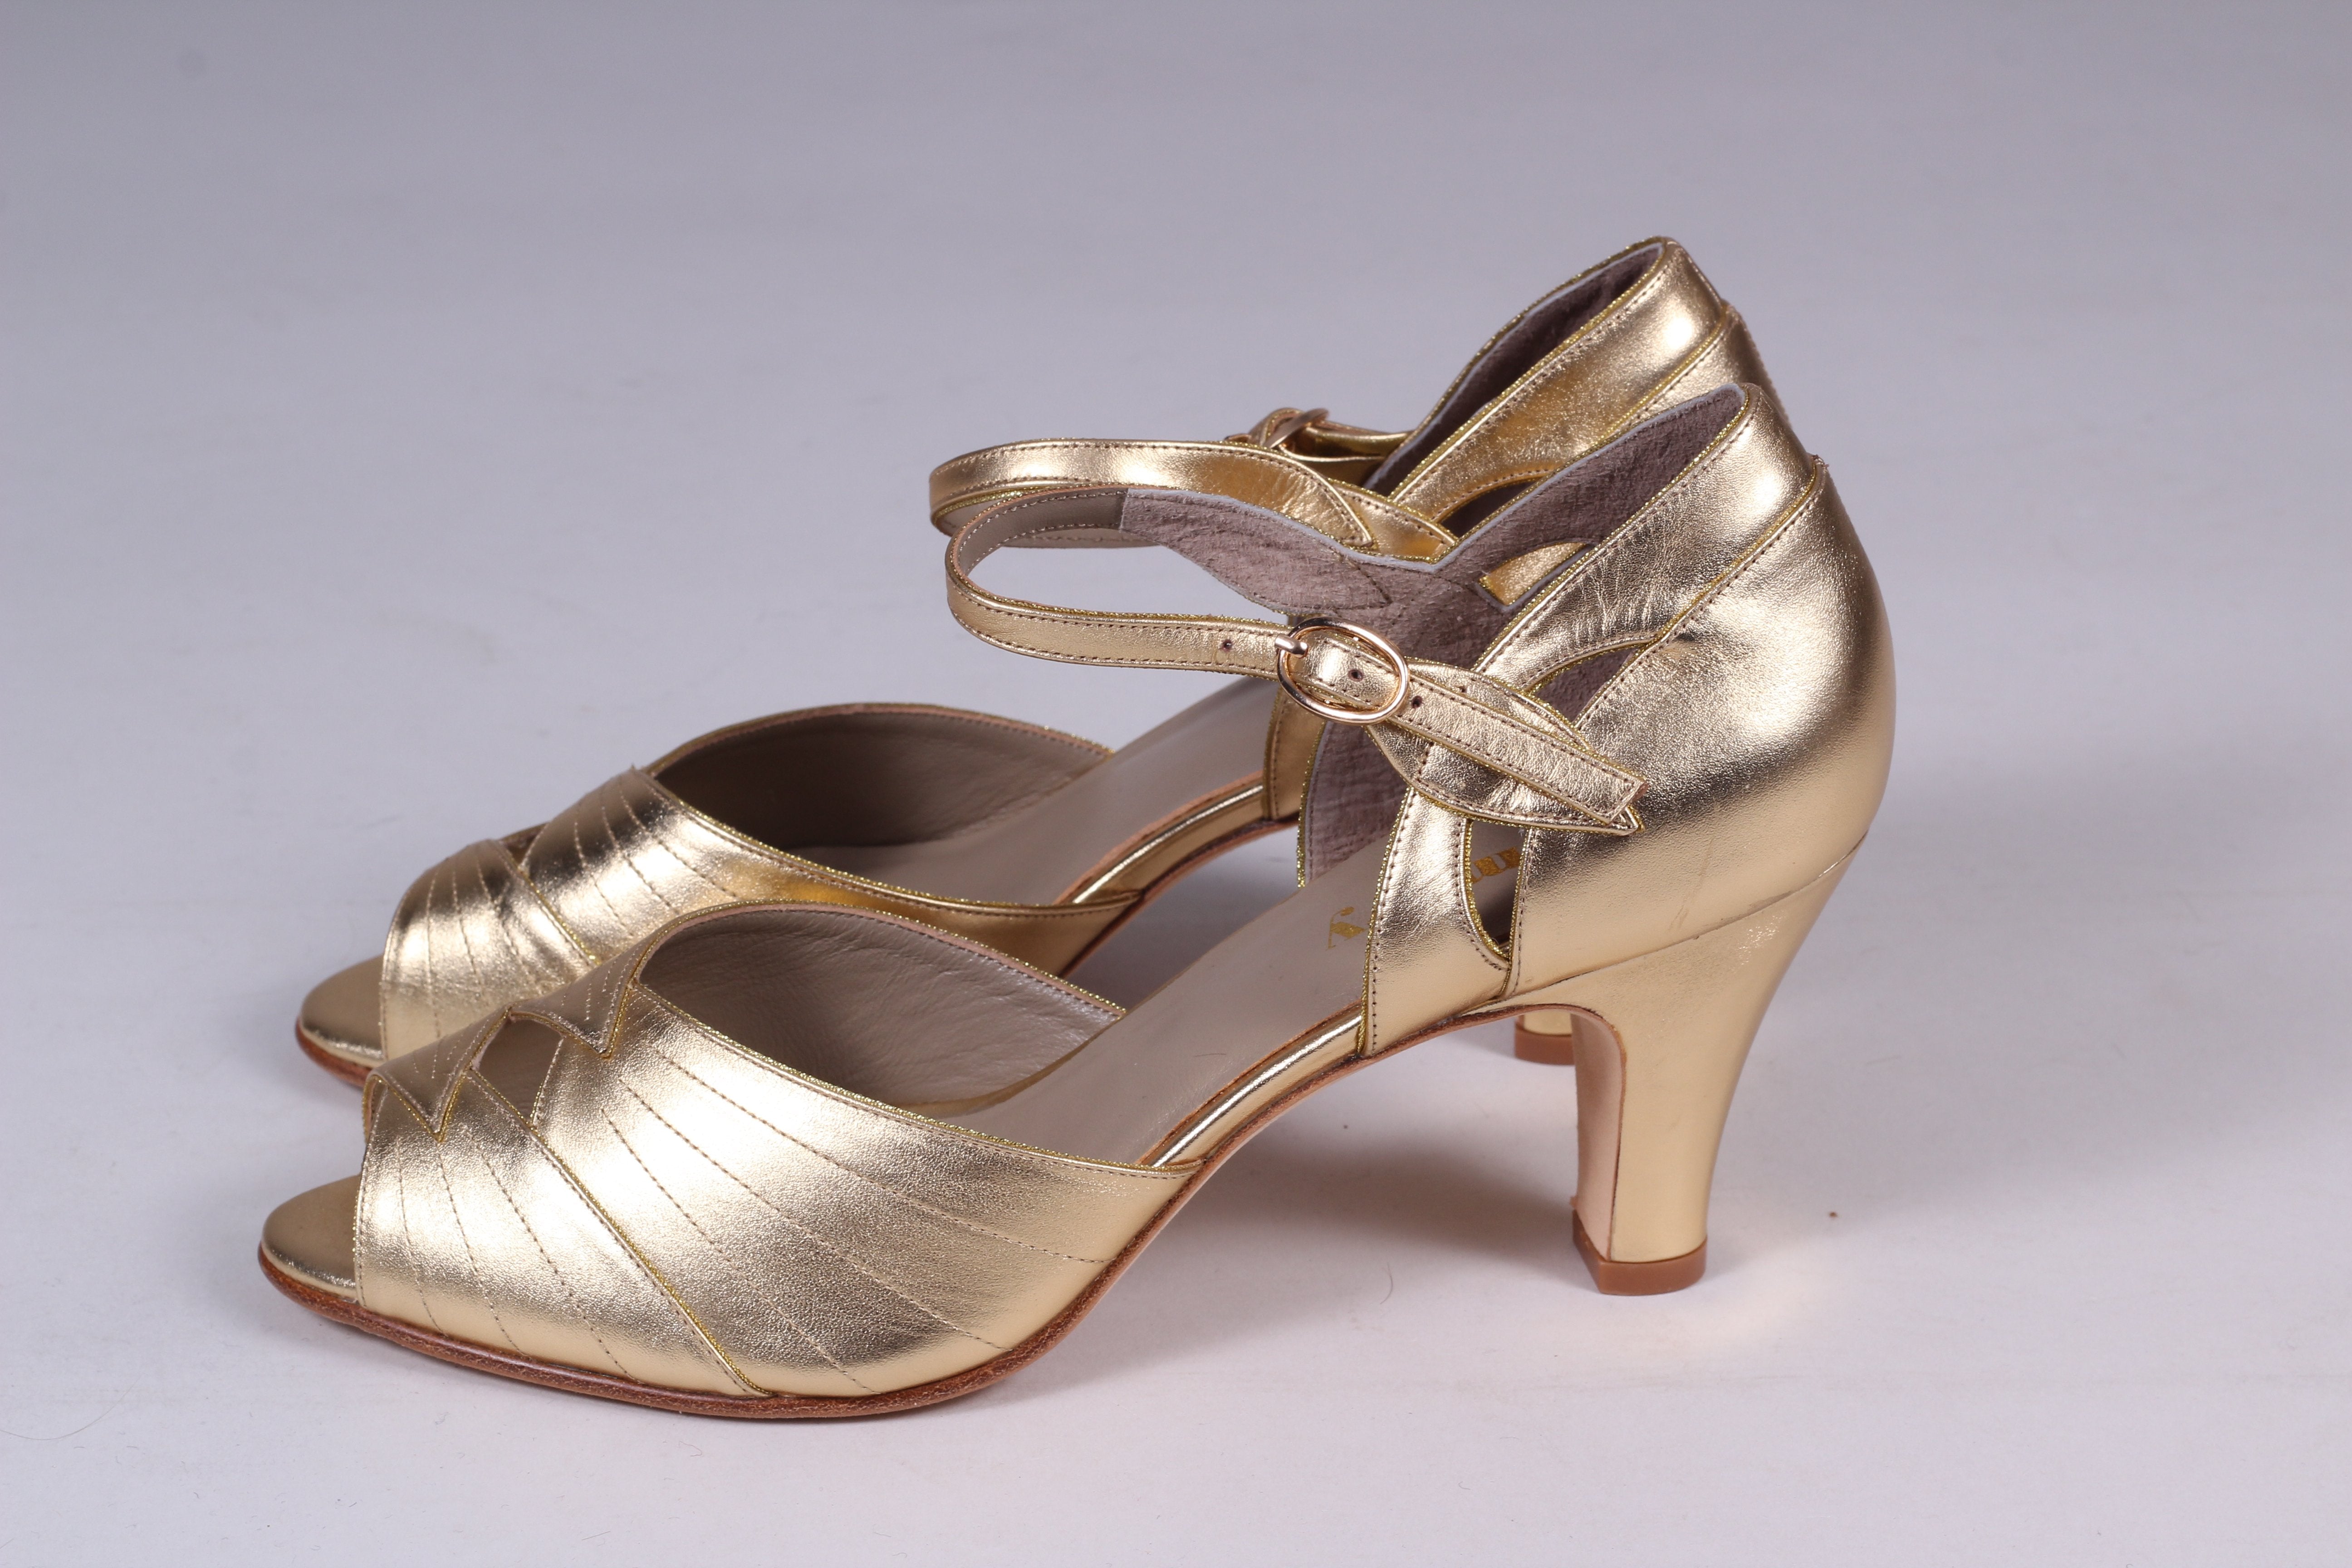 30s inspired high heel evening shoes - gold - Susan